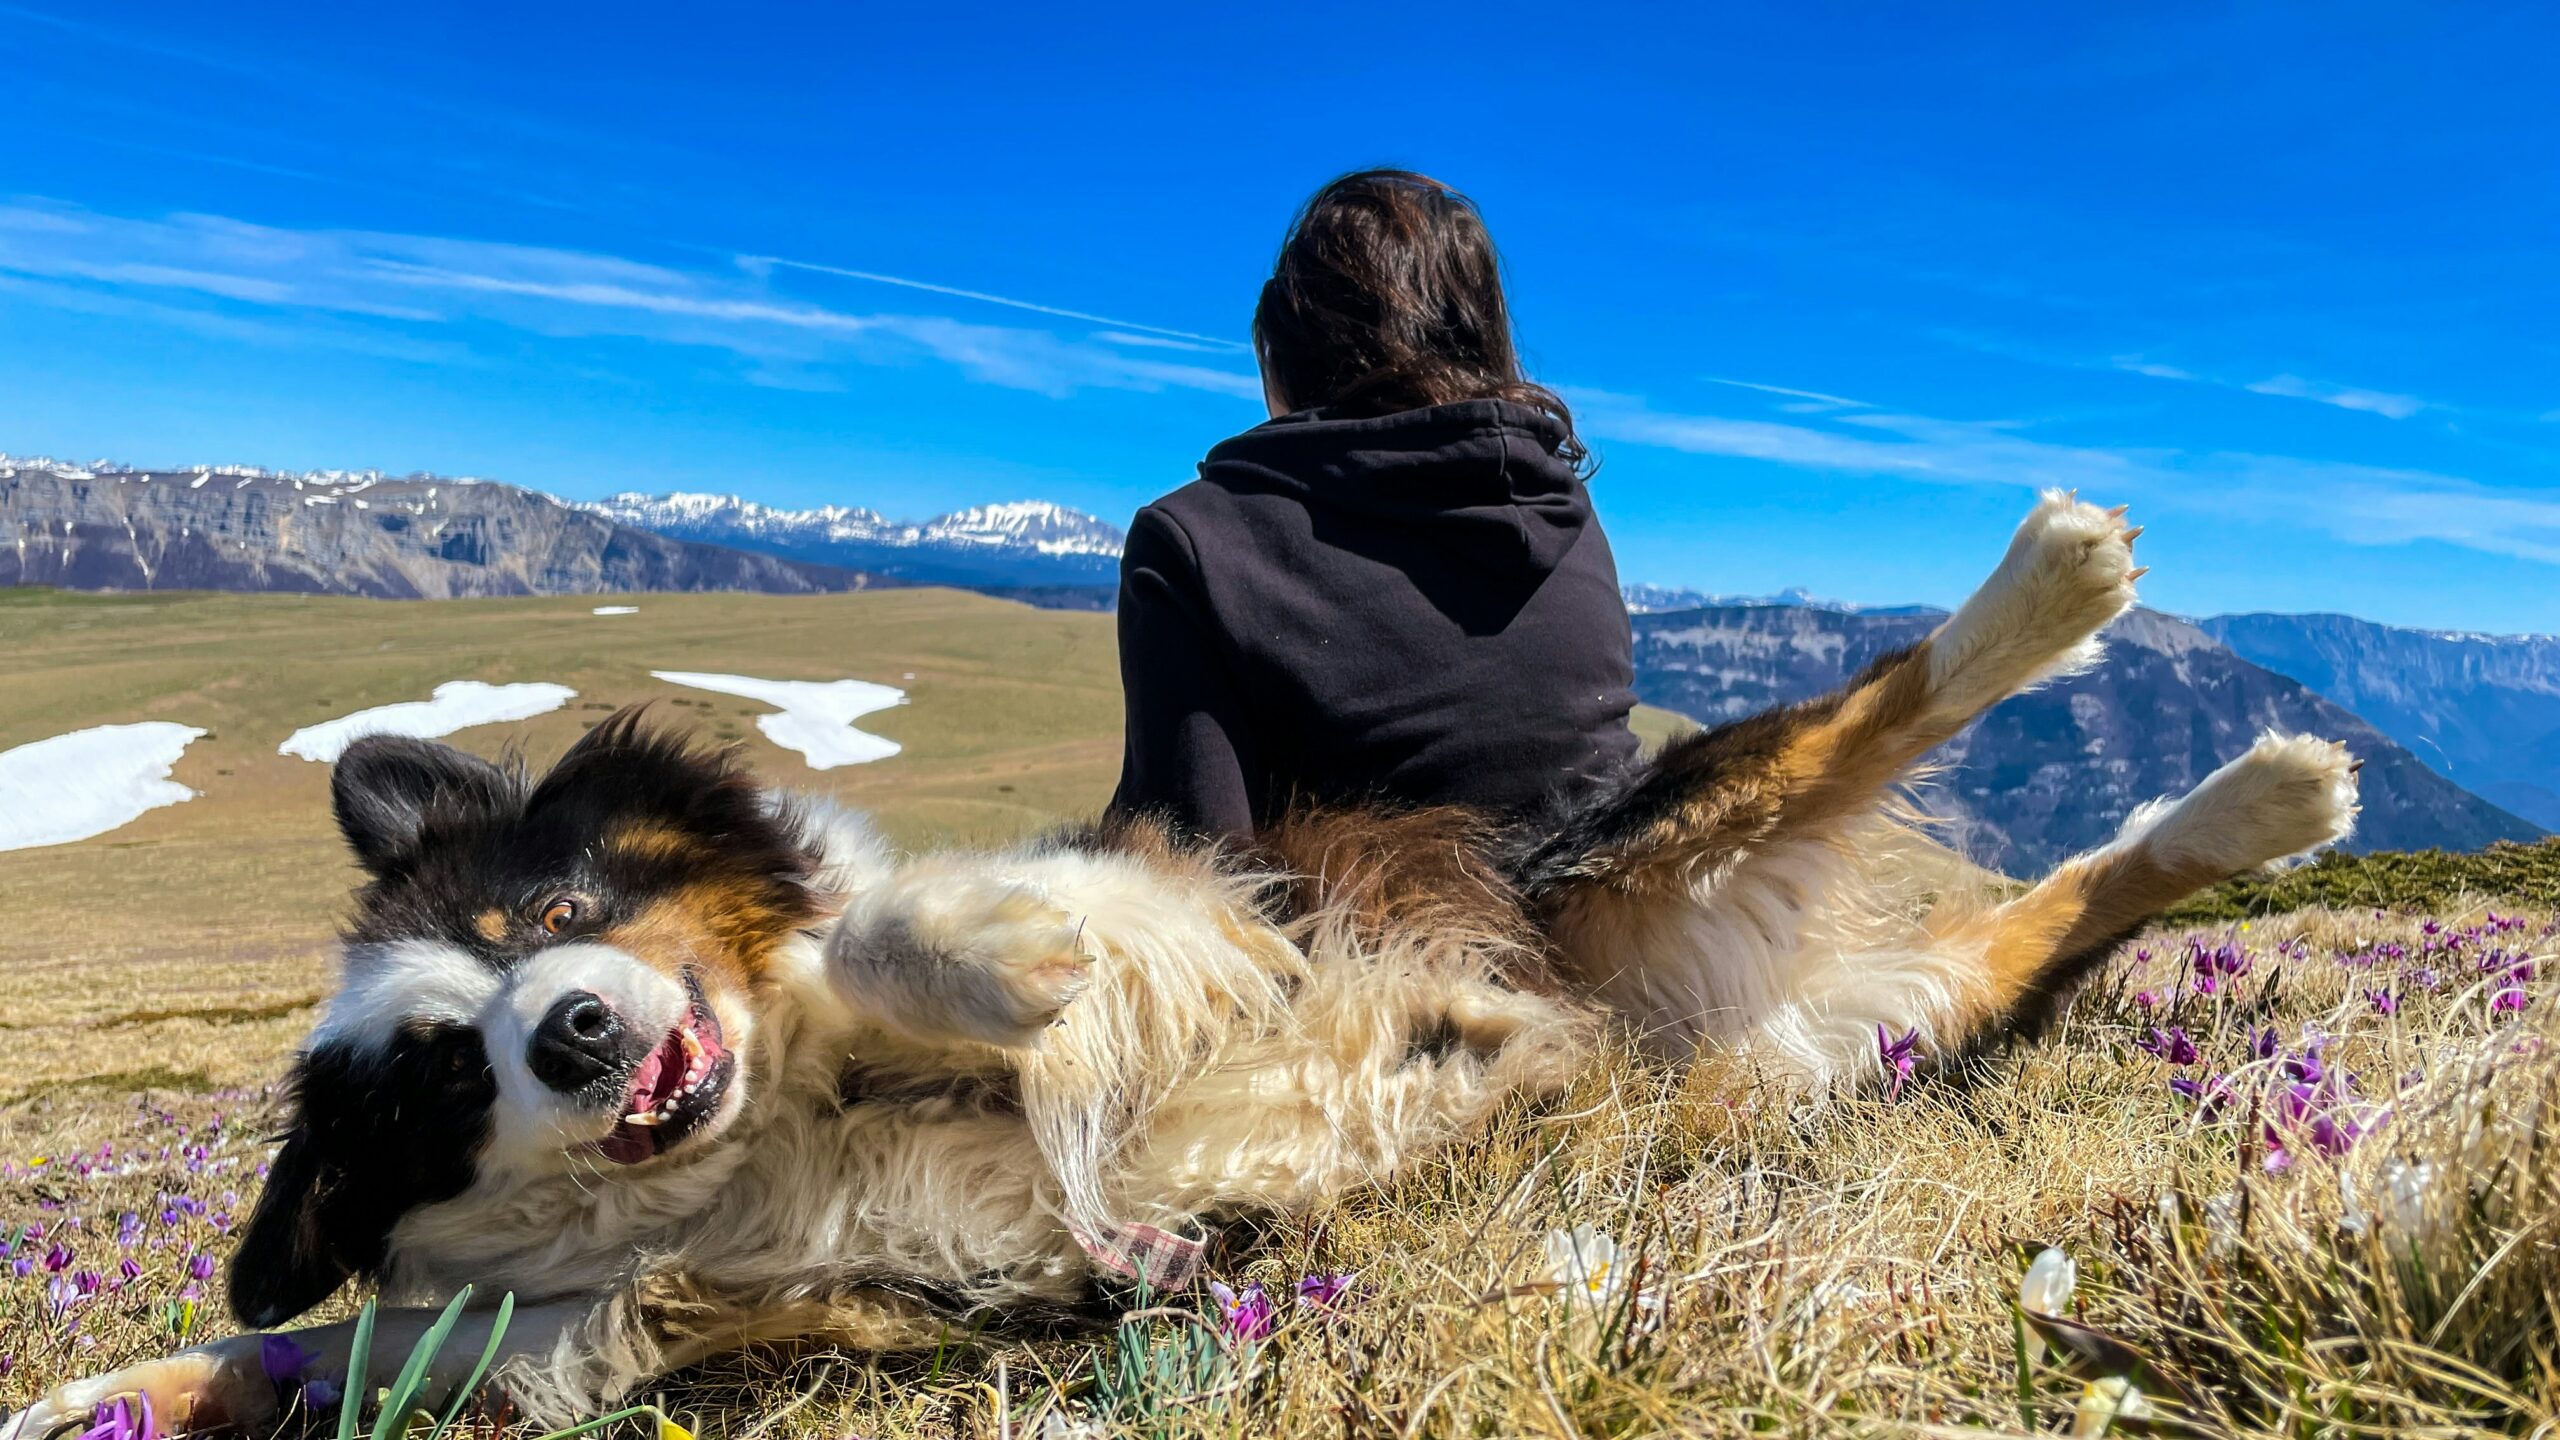 a woman sitting on top of a mountain next to a dog